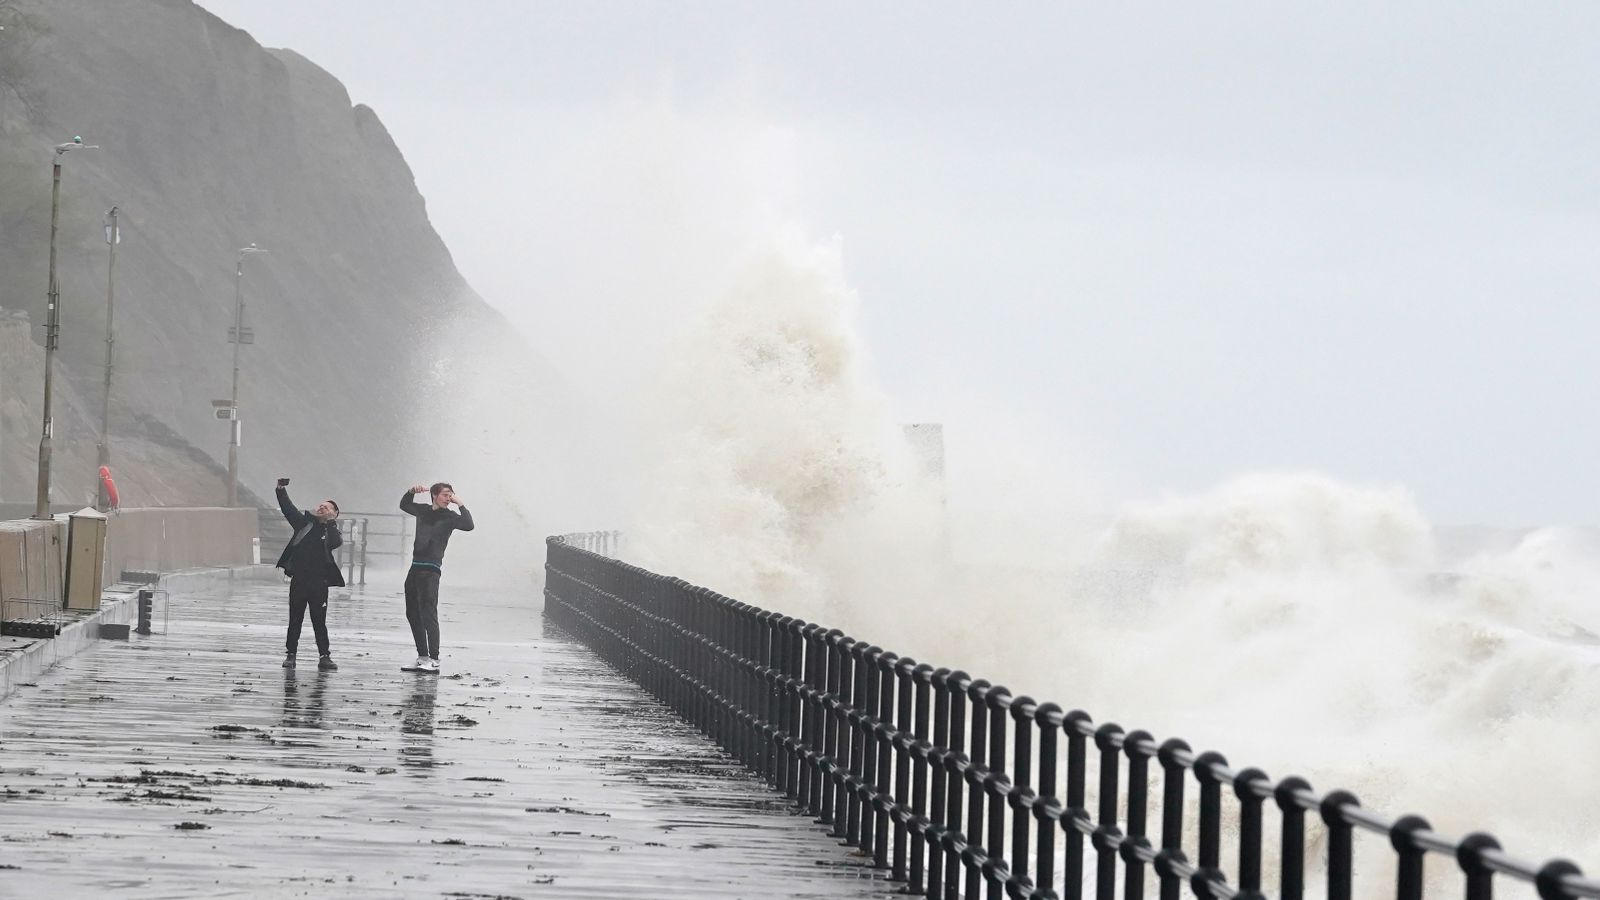 UK weather: Heavy rain warning issued - days after Storm Ciaran caused chaos